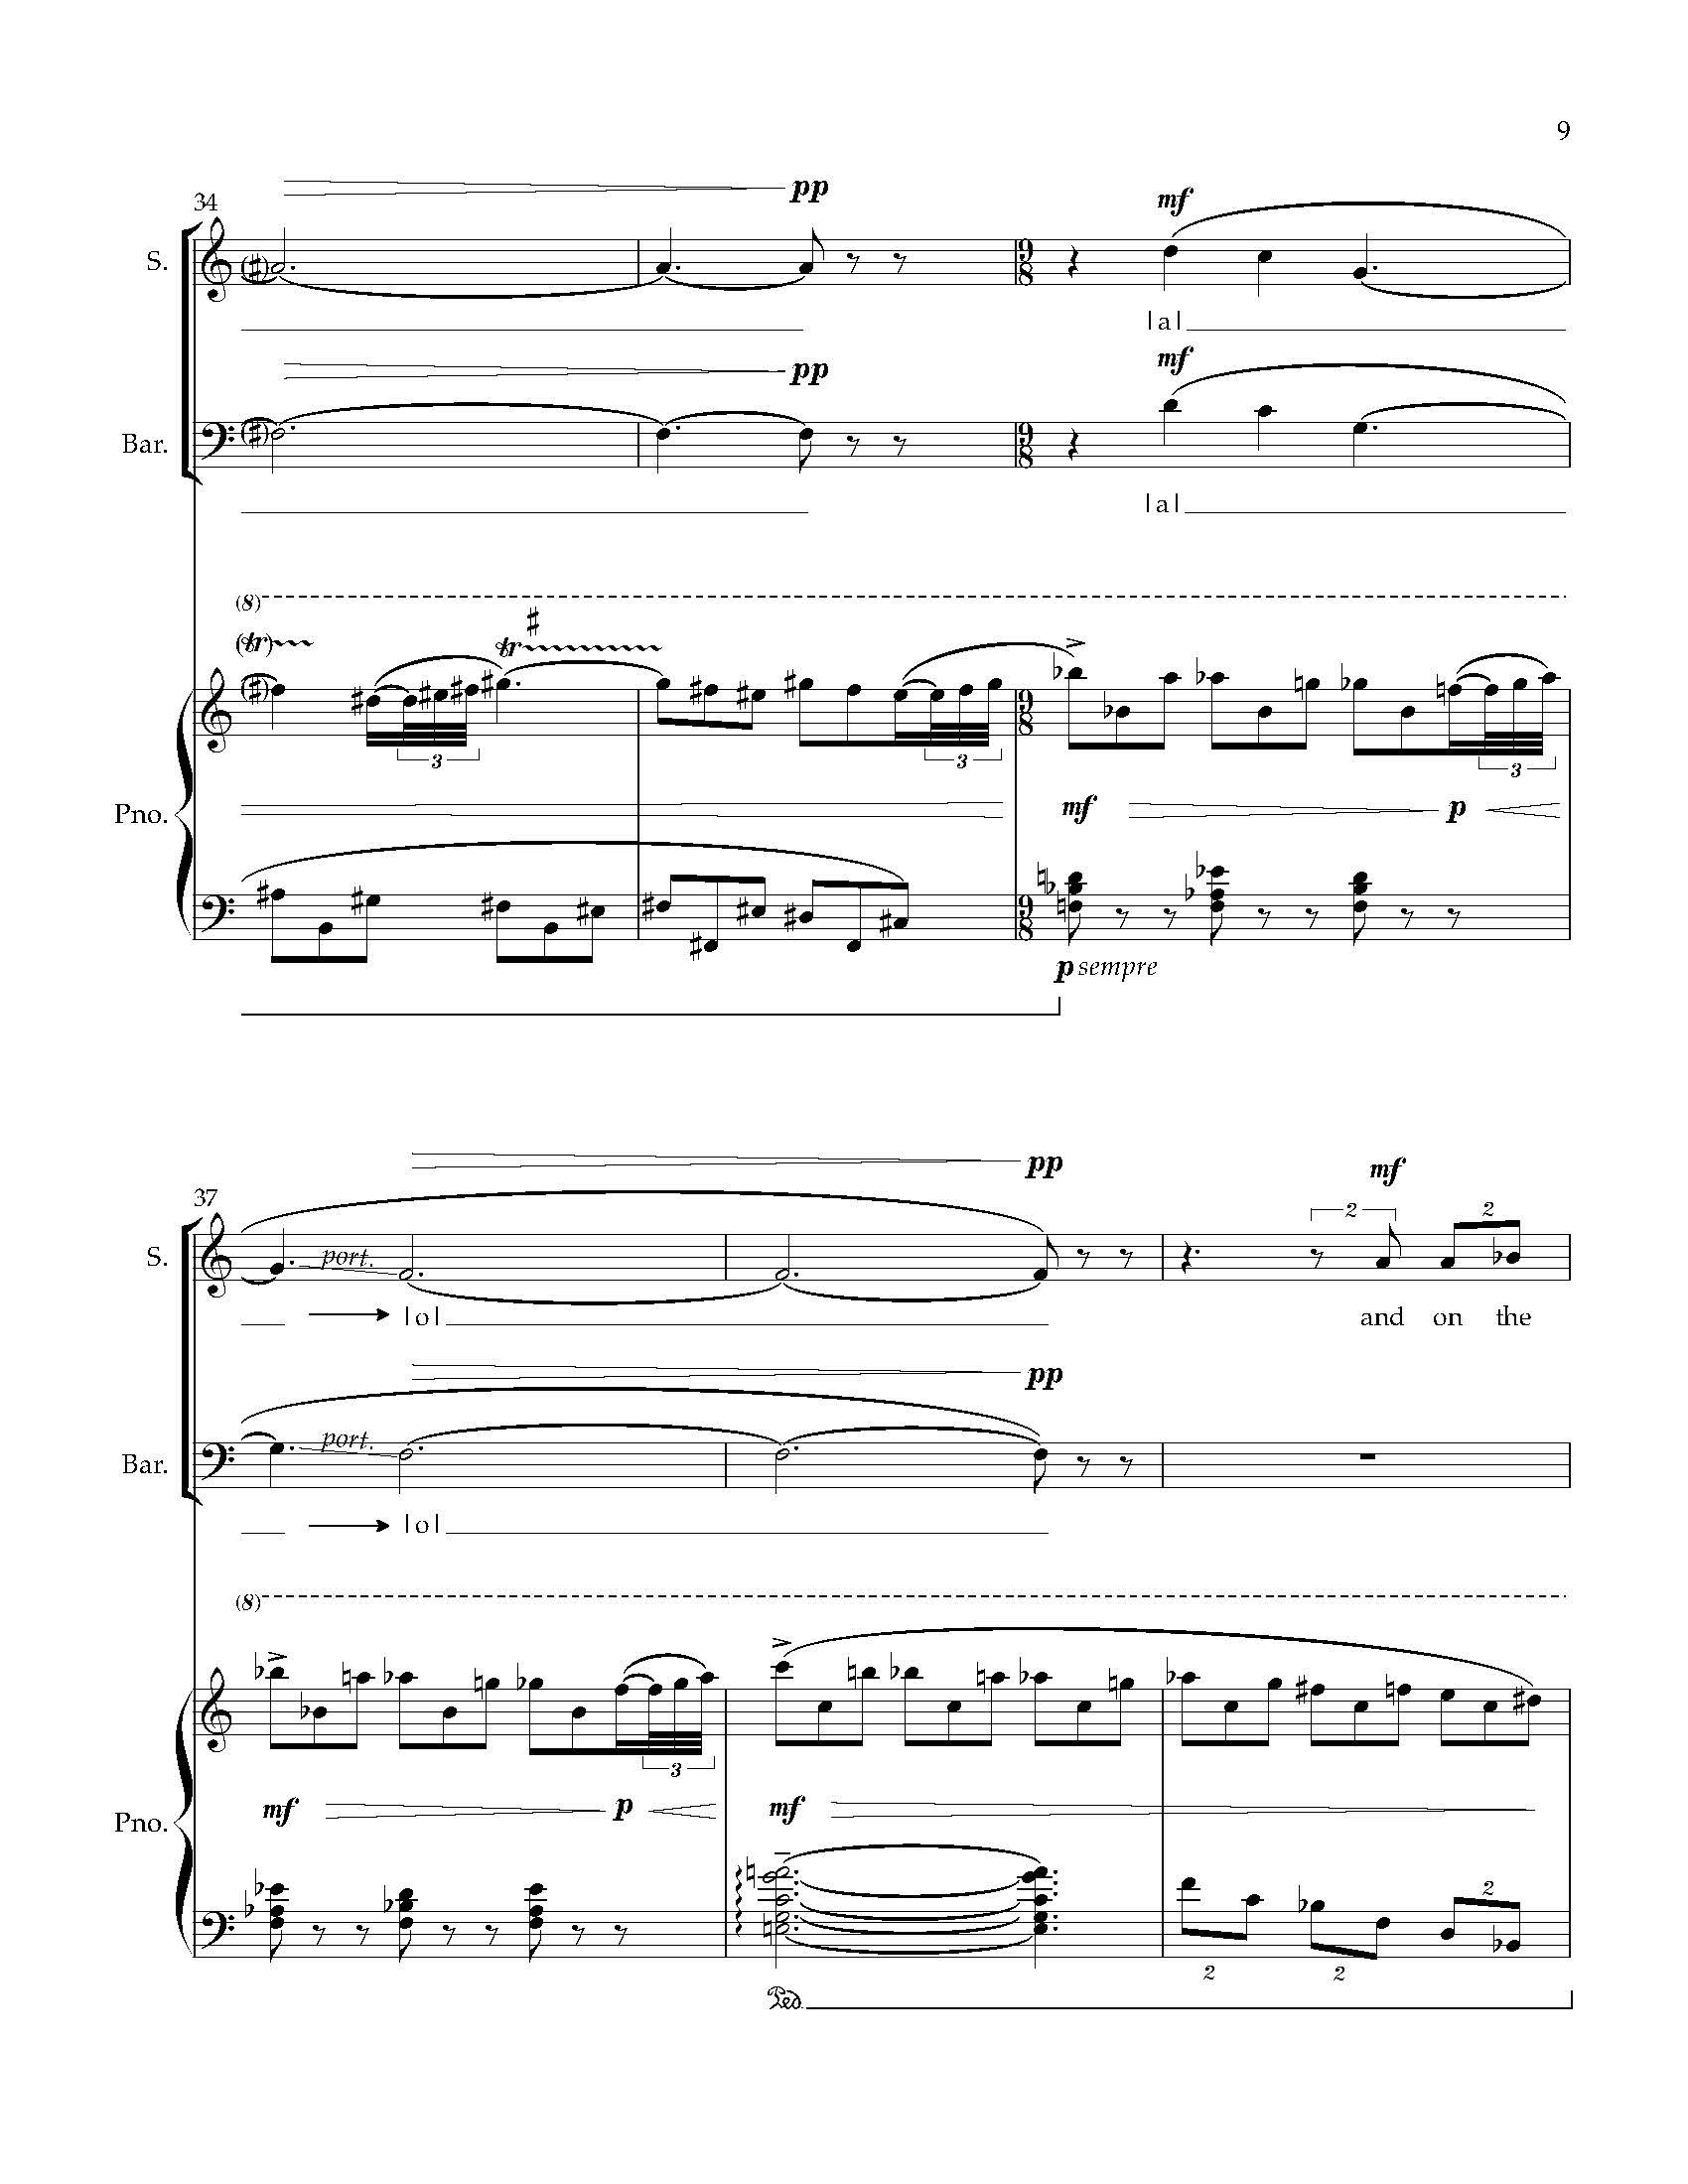 Sky - Complete Score (Revised)_Page_15.jpg